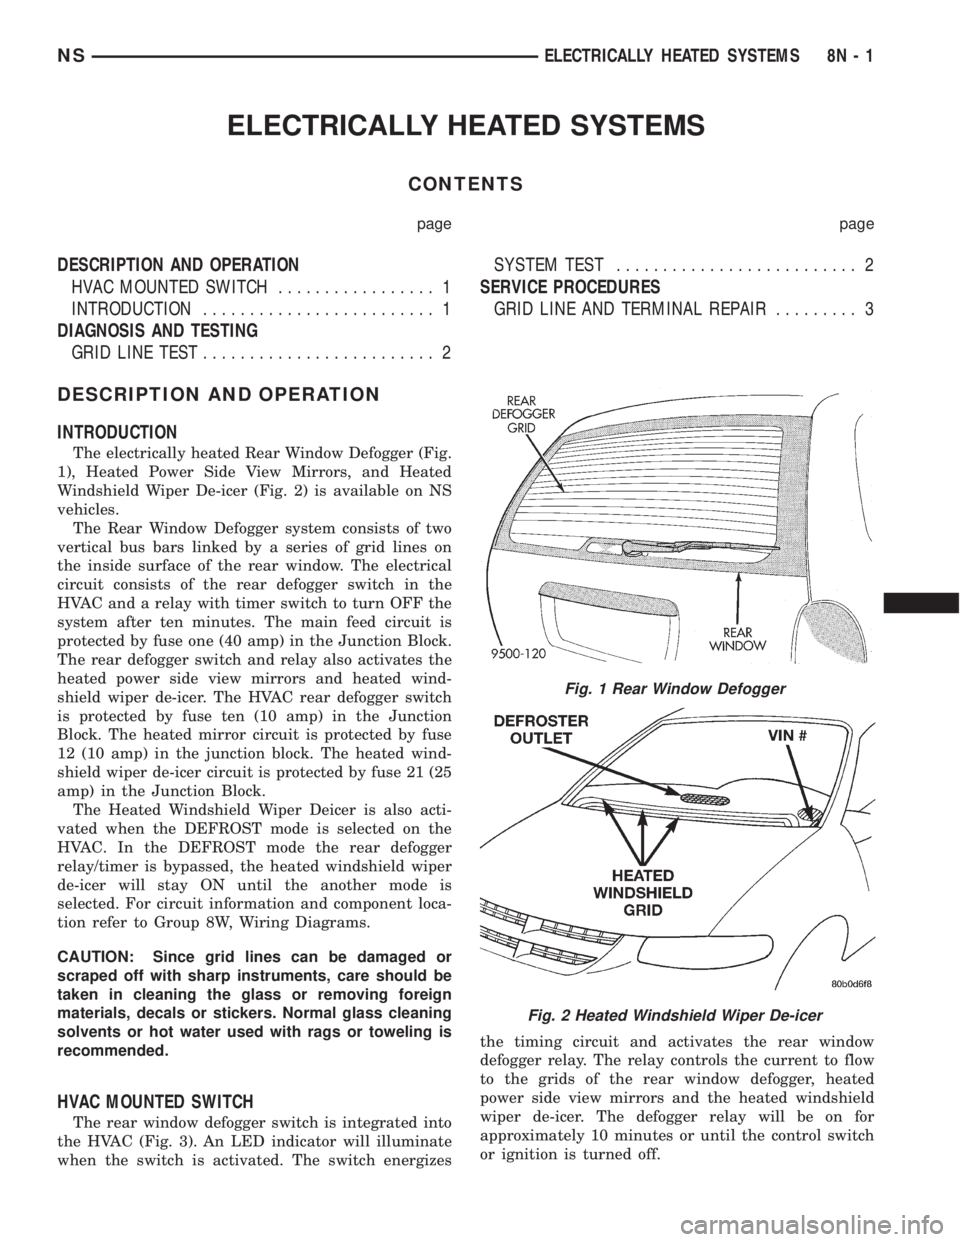 CHRYSLER VOYAGER 1996  Service Manual ELECTRICALLY HEATED SYSTEMS
CONTENTS
page page
DESCRIPTION AND OPERATION
HVAC MOUNTED SWITCH................. 1
INTRODUCTION......................... 1
DIAGNOSIS AND TESTING
GRID LINE TEST............